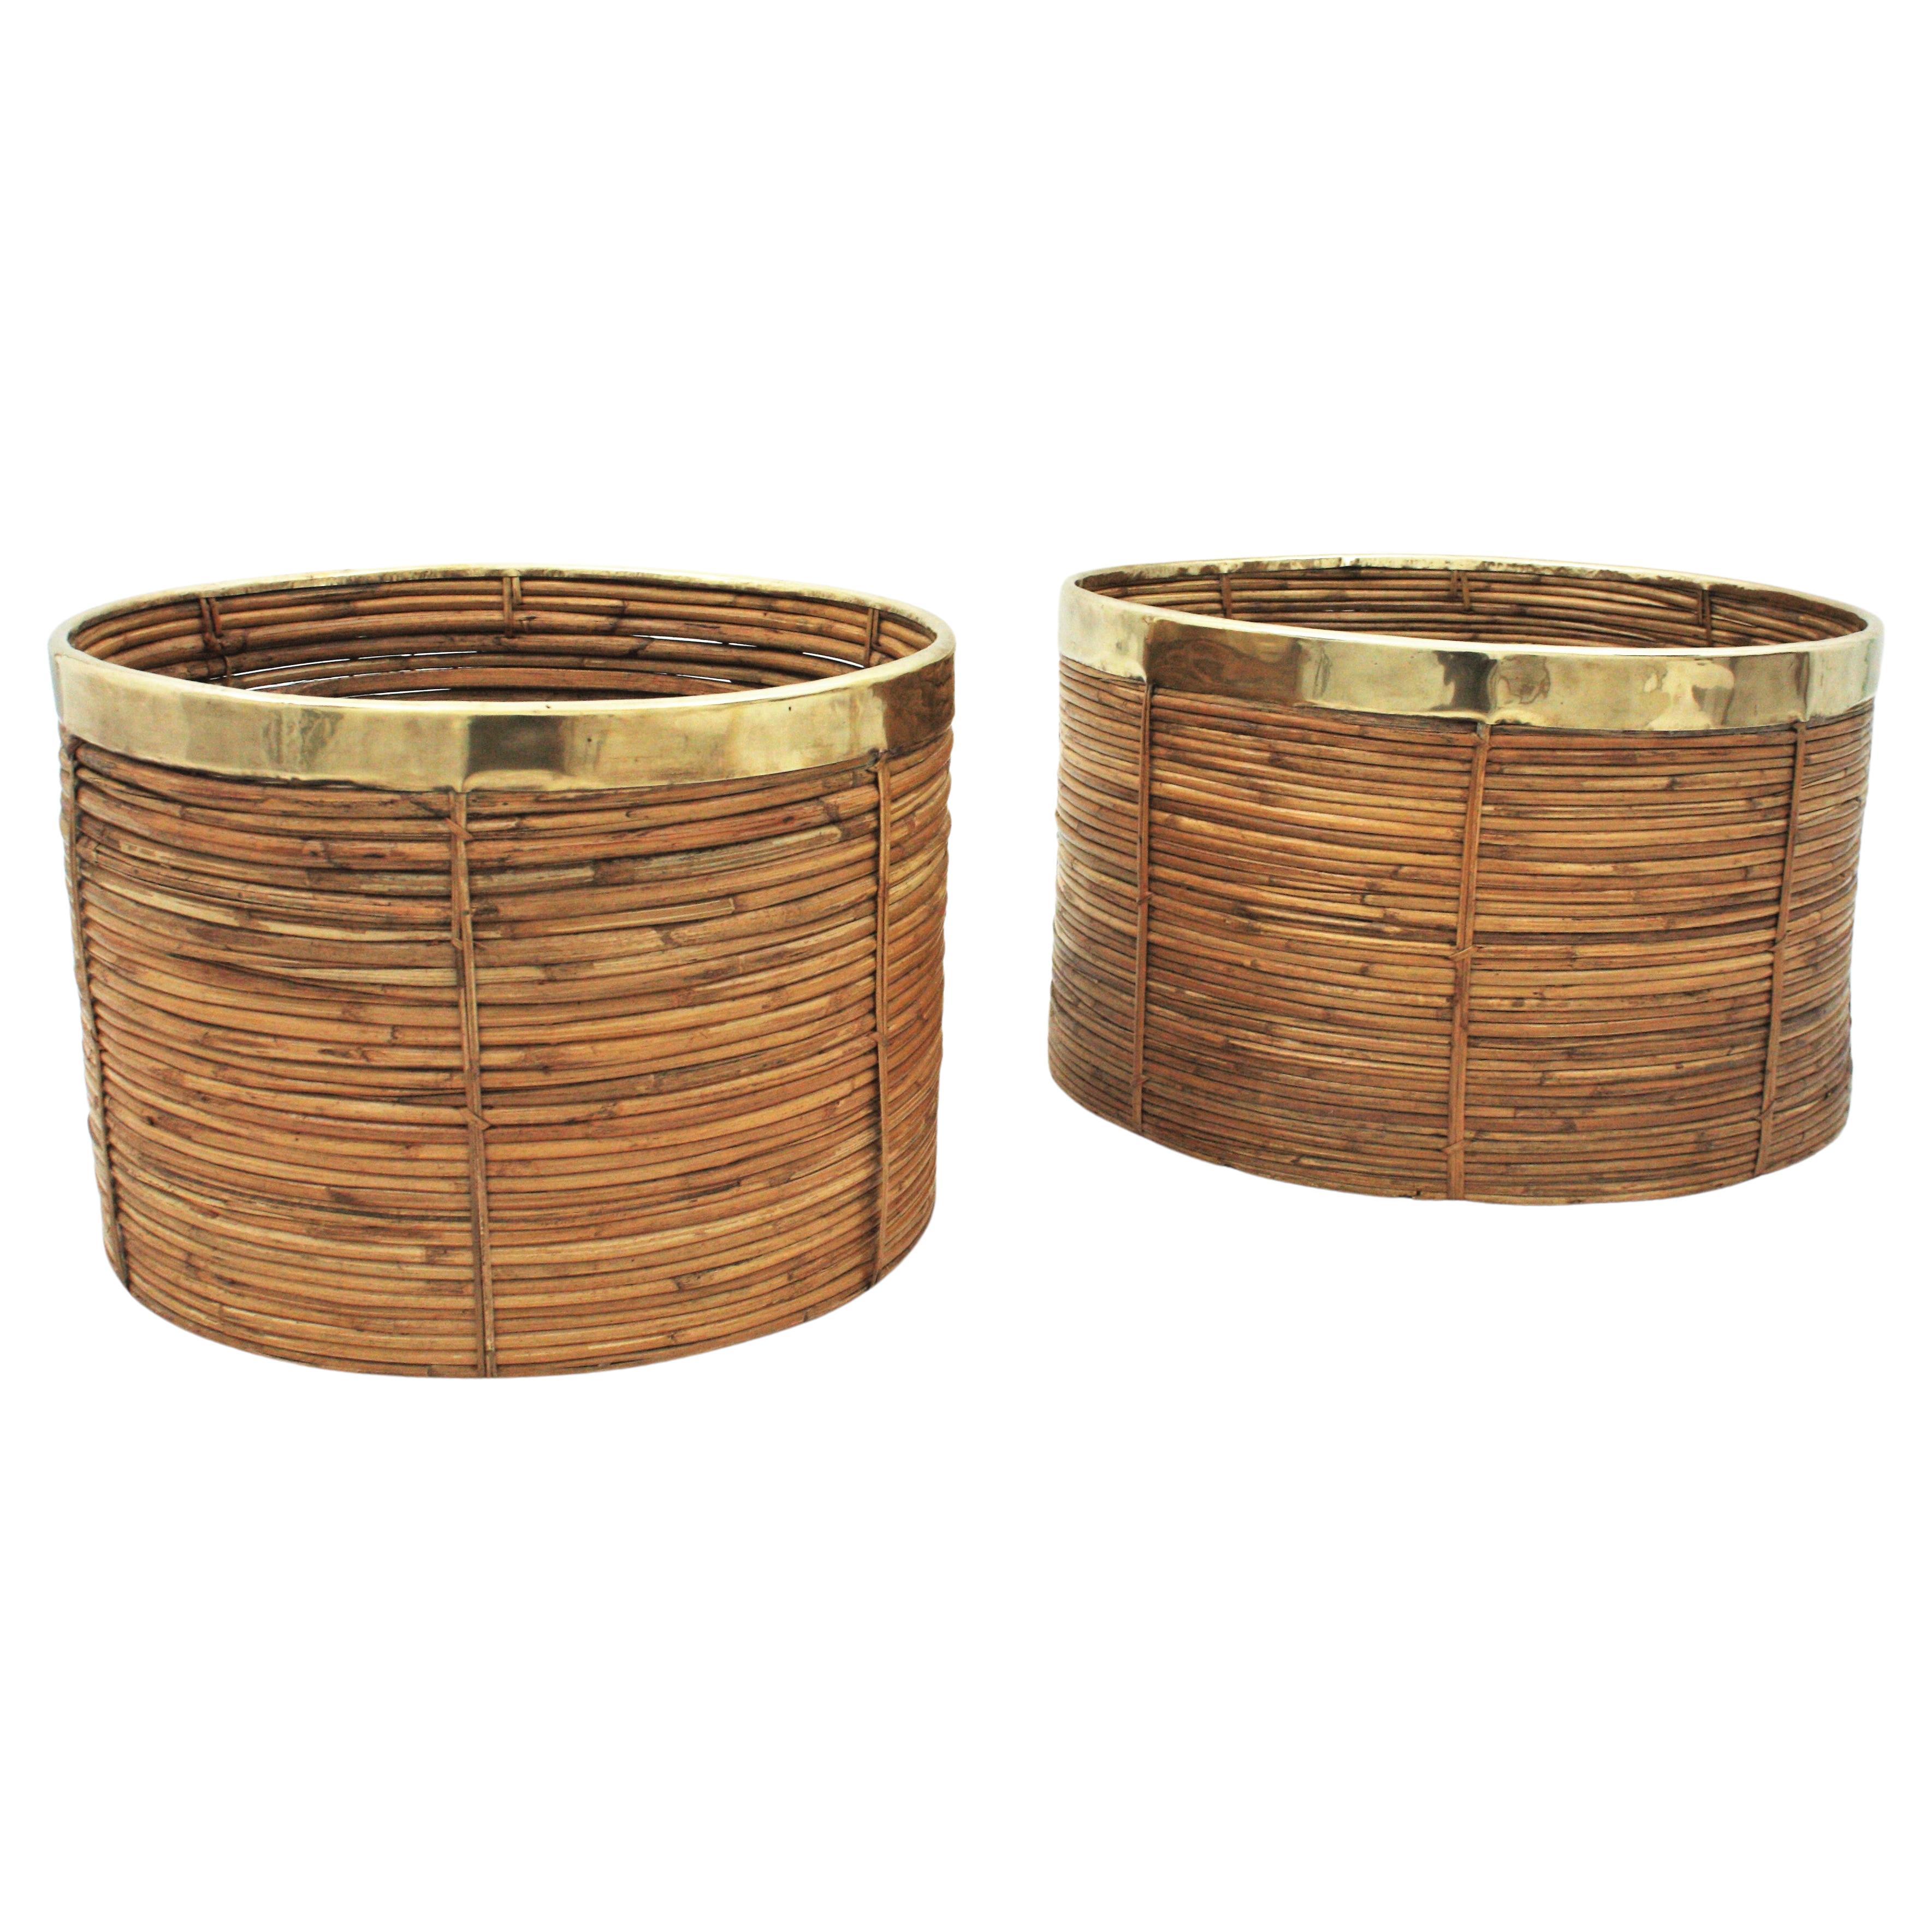 Beautiful set of two Mid-Century Modern decorative brass and rattan extra-large planters or baskets. Handcrafted in Italy, 1970s.
Round shape with gilded brass rim. Inspired on Gabriella Crespi designs.
Both are large planters, one of them is